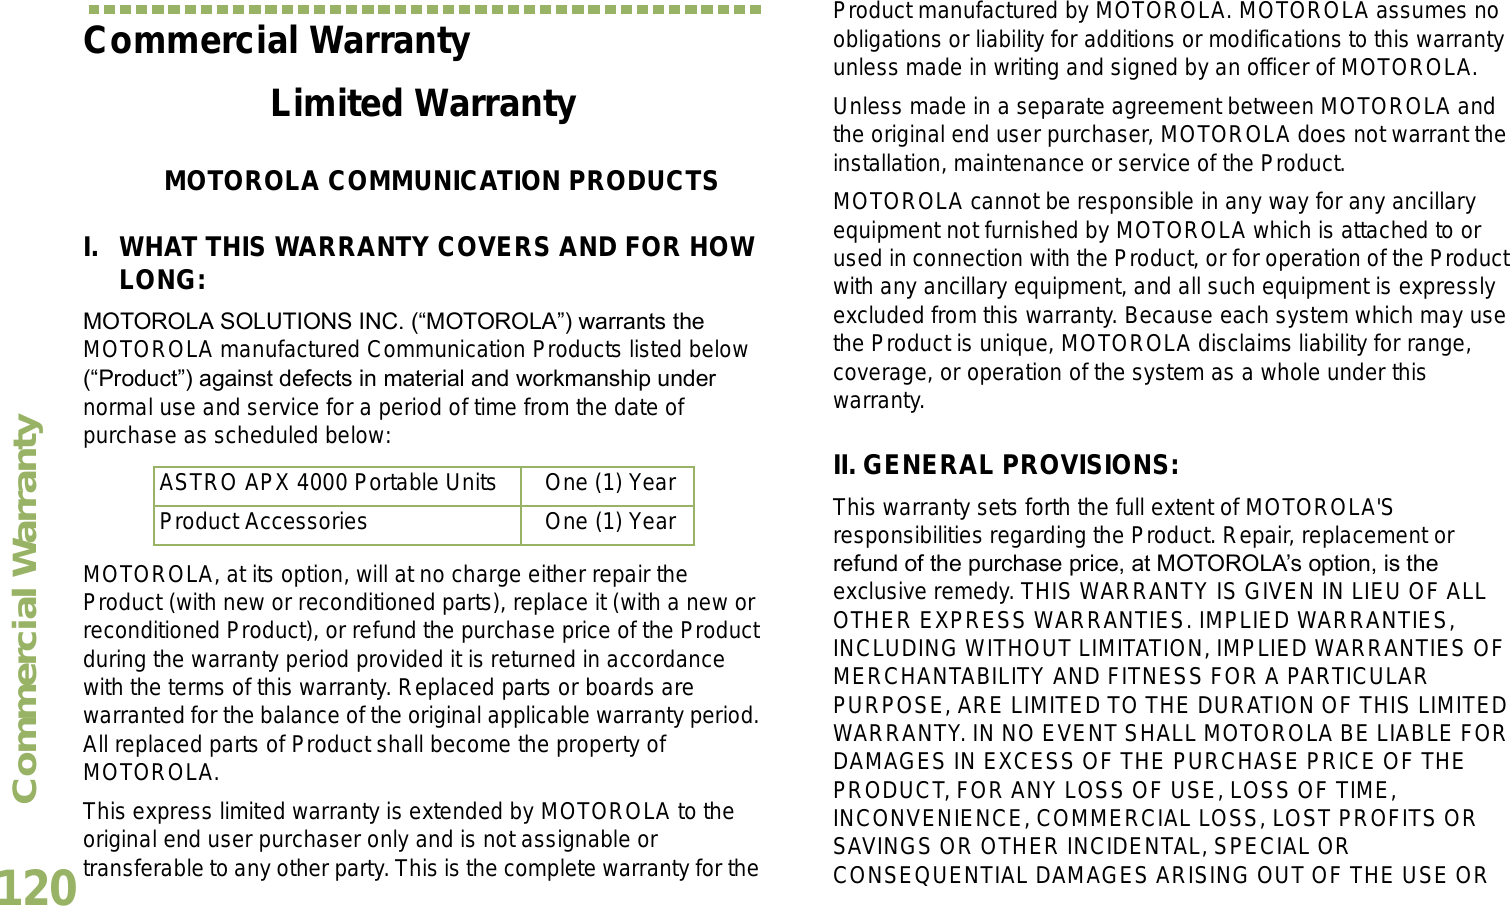 Commercial WarrantyEnglish120Commercial WarrantyLimited WarrantyMOTOROLA COMMUNICATION PRODUCTSI. WHAT THIS WARRANTY COVERS AND FOR HOW LONG:MOTOROLA SOLUTIONS INC. (MOTOROLA) warrants the MOTOROLA manufactured Communication Products listed below (Product) against defects in material and workmanship under normal use and service for a period of time from the date of purchase as scheduled below:MOTOROLA, at its option, will at no charge either repair the Product (with new or reconditioned parts), replace it (with a new or reconditioned Product), or refund the purchase price of the Product during the warranty period provided it is returned in accordance with the terms of this warranty. Replaced parts or boards are warranted for the balance of the original applicable warranty period. All replaced parts of Product shall become the property of MOTOROLA.This express limited warranty is extended by MOTOROLA to the original end user purchaser only and is not assignable or transferable to any other party. This is the complete warranty for the Product manufactured by MOTOROLA. MOTOROLA assumes no obligations or liability for additions or modifications to this warranty unless made in writing and signed by an officer of MOTOROLA. Unless made in a separate agreement between MOTOROLA and the original end user purchaser, MOTOROLA does not warrant the installation, maintenance or service of the Product.MOTOROLA cannot be responsible in any way for any ancillary equipment not furnished by MOTOROLA which is attached to or used in connection with the Product, or for operation of the Product with any ancillary equipment, and all such equipment is expressly excluded from this warranty. Because each system which may use the Product is unique, MOTOROLA disclaims liability for range, coverage, or operation of the system as a whole under this warranty.II. GENERAL PROVISIONS:This warranty sets forth the full extent of MOTOROLA&apos;S responsibilities regarding the Product. Repair, replacement or refund of the purchase price, at MOTOROLAs option, is the exclusive remedy. THIS WARRANTY IS GIVEN IN LIEU OF ALL OTHER EXPRESS WARRANTIES. IMPLIED WARRANTIES, INCLUDING WITHOUT LIMITATION, IMPLIED WARRANTIES OF MERCHANTABILITY AND FITNESS FOR A PARTICULAR PURPOSE, ARE LIMITED TO THE DURATION OF THIS LIMITED WARRANTY. IN NO EVENT SHALL MOTOROLA BE LIABLE FOR DAMAGES IN EXCESS OF THE PURCHASE PRICE OF THE PRODUCT, FOR ANY LOSS OF USE, LOSS OF TIME, INCONVENIENCE, COMMERCIAL LOSS, LOST PROFITS OR SAVINGS OR OTHER INCIDENTAL, SPECIAL OR CONSEQUENTIAL DAMAGES ARISING OUT OF THE USE OR ASTRO APX 4000 Portable Units One (1) YearProduct Accessories One (1) Year